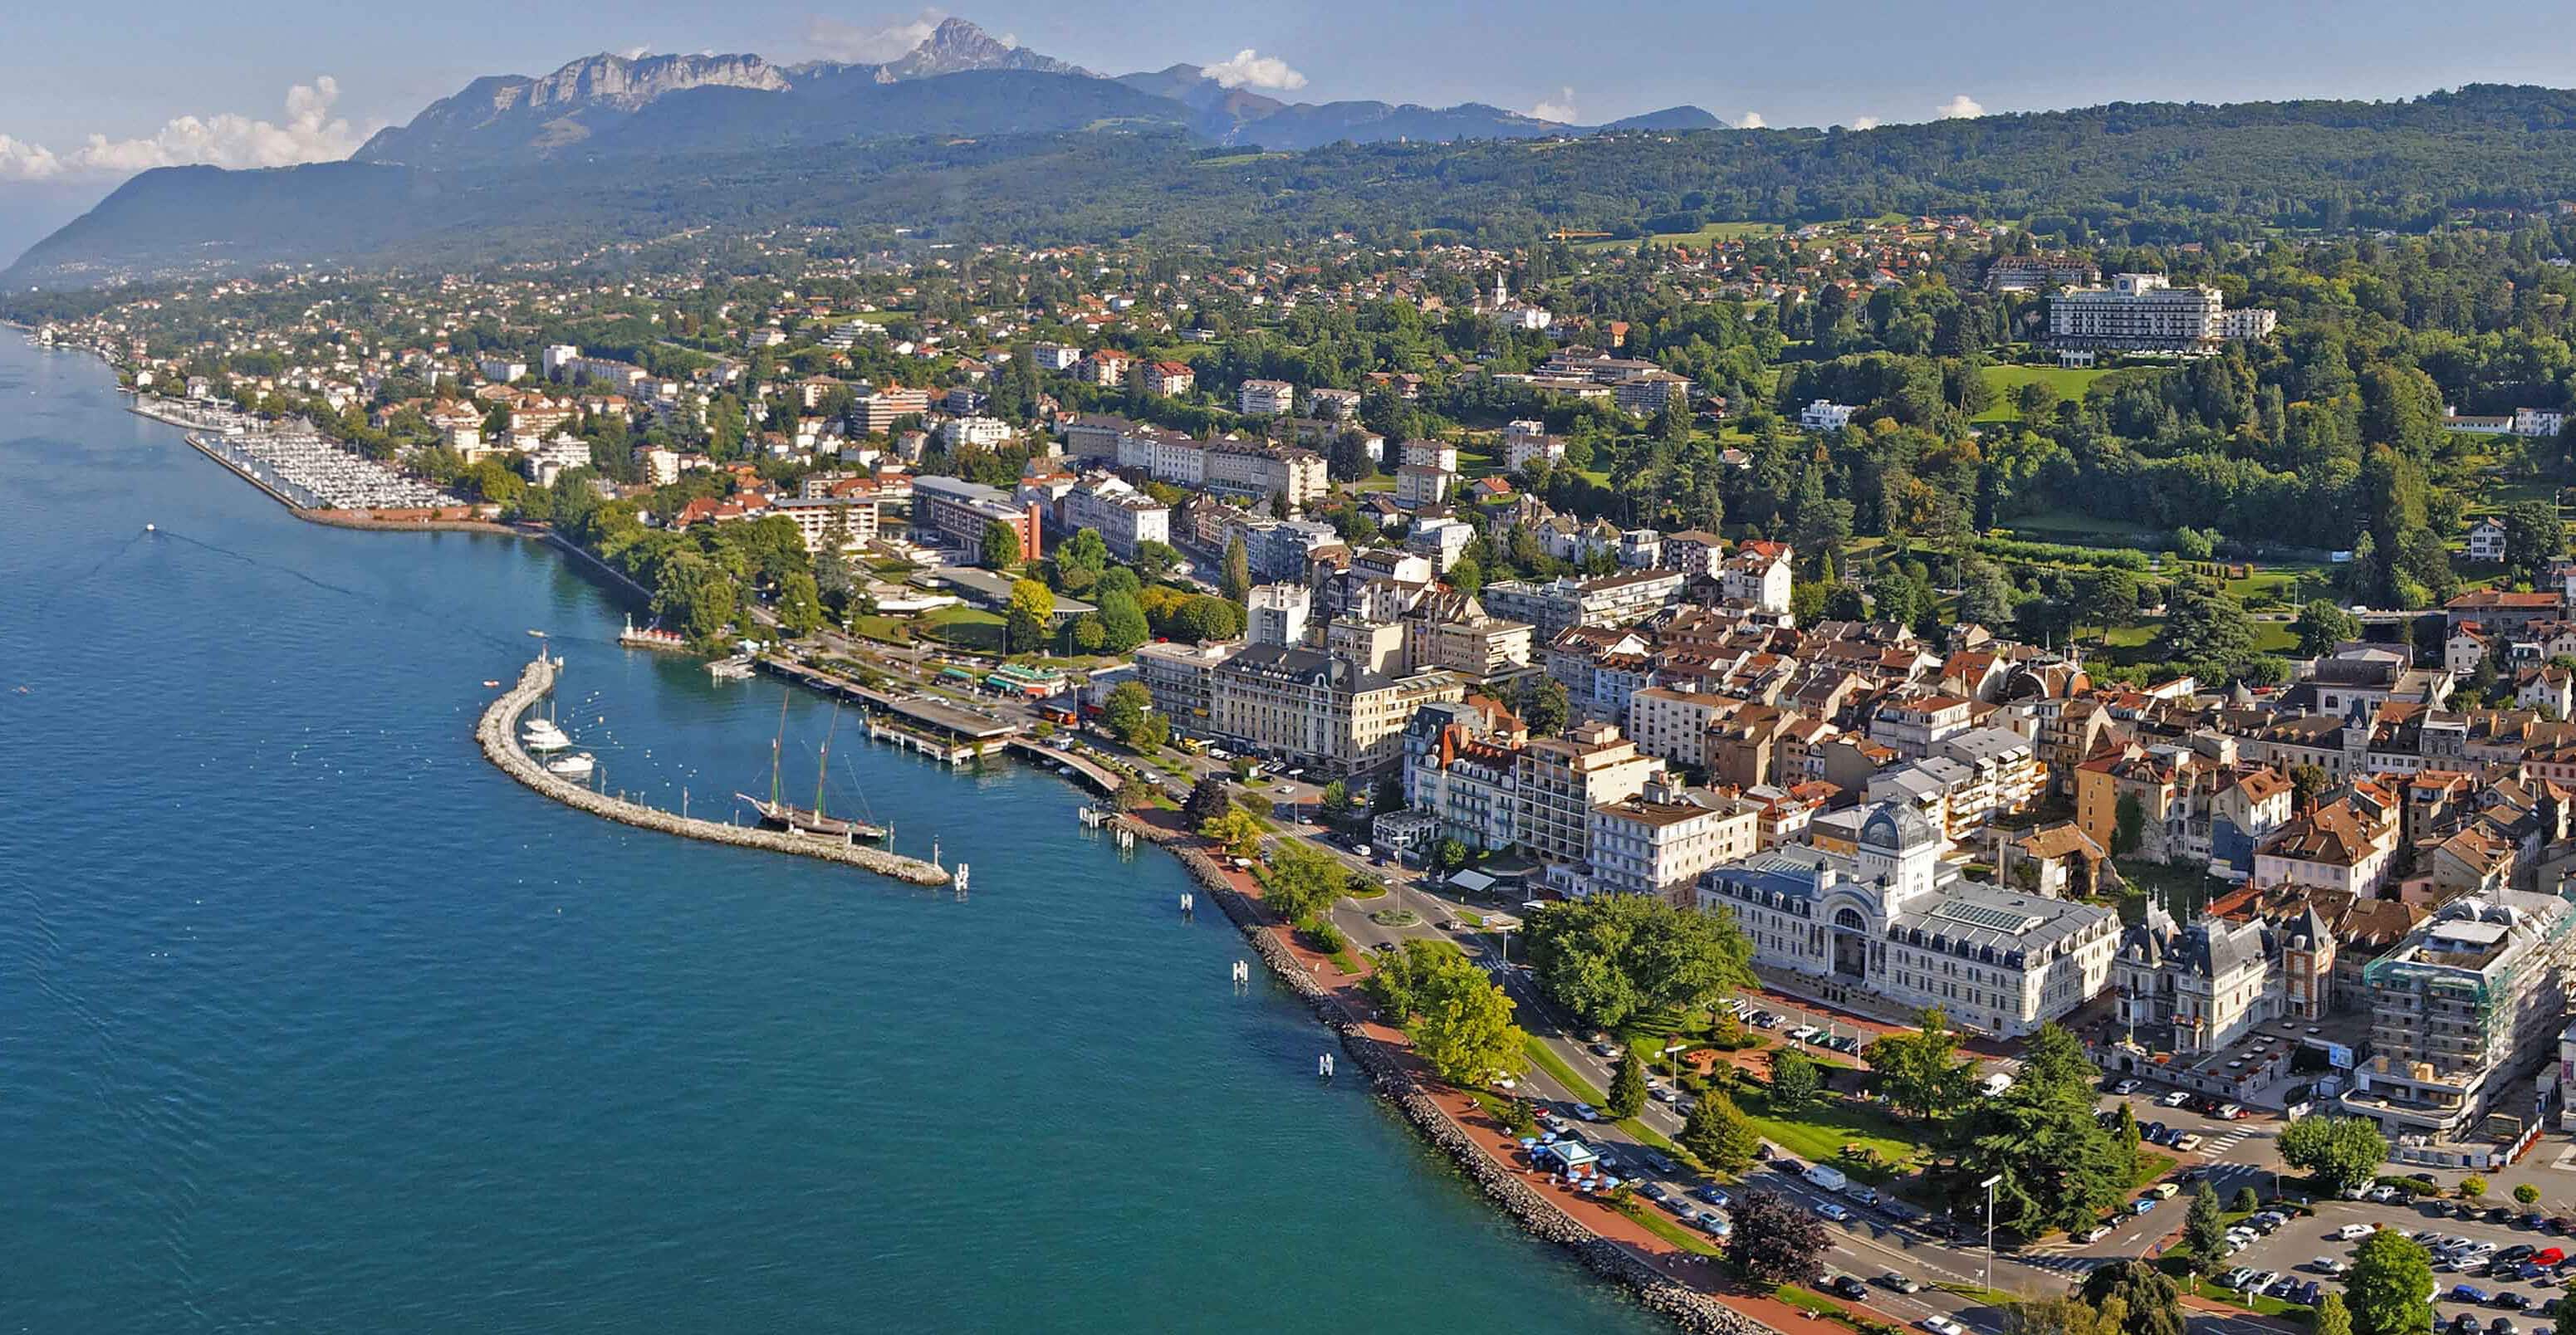 Aerial view of Evian-les-Bains, located on the shore of Lake Geneva